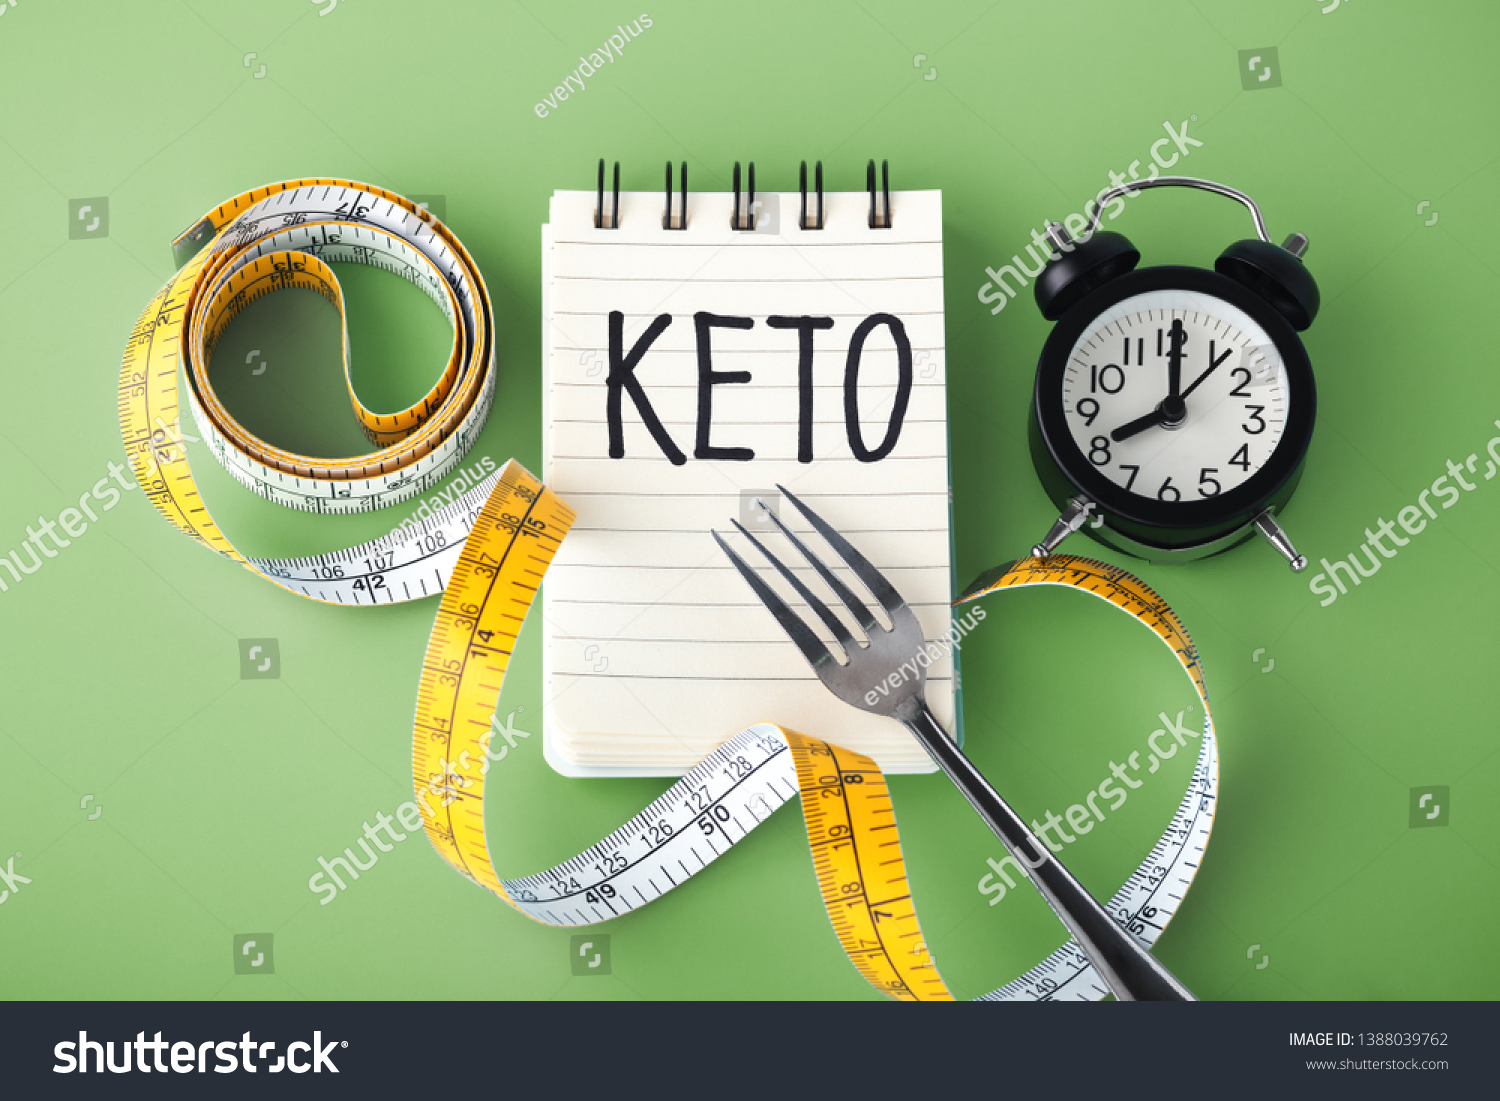 Keto word on notebook with clock fork and measuring tape around, intermittent fasting on keto concept #1388039762